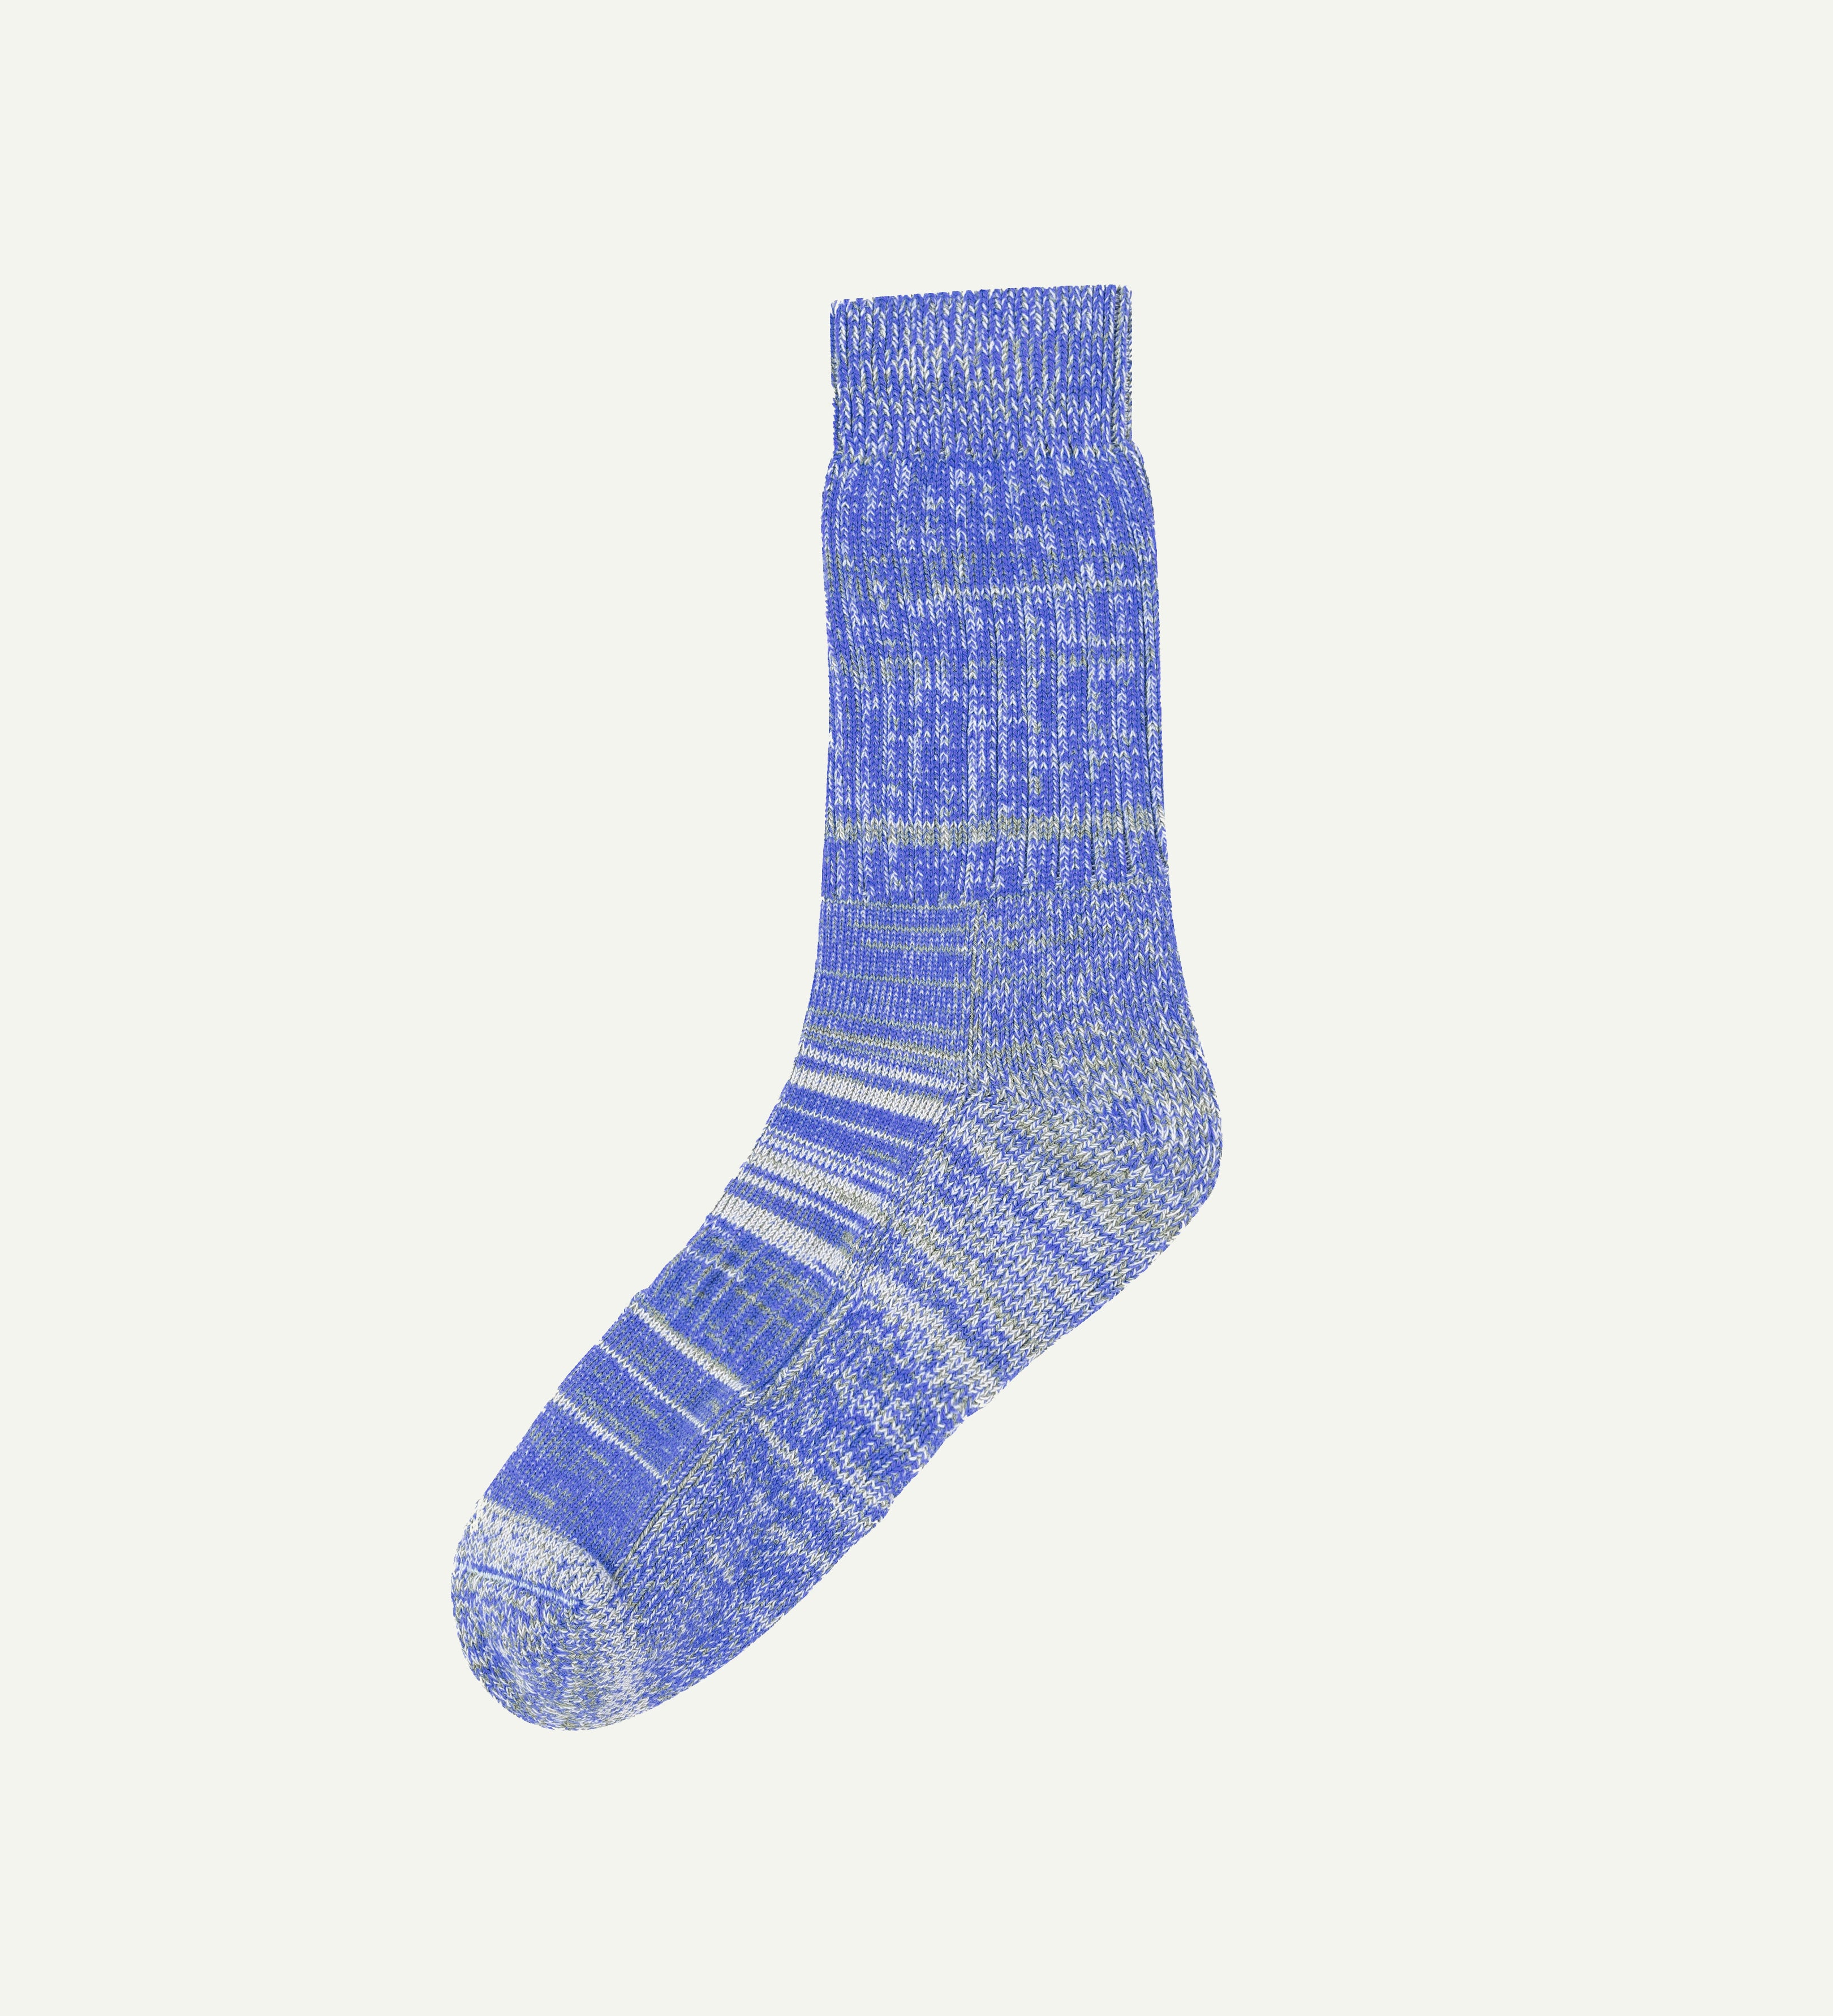 Flat view of Uskees #4006 organic cotton socks in ultra blue, showing subtle bands of blue, white and  yellow